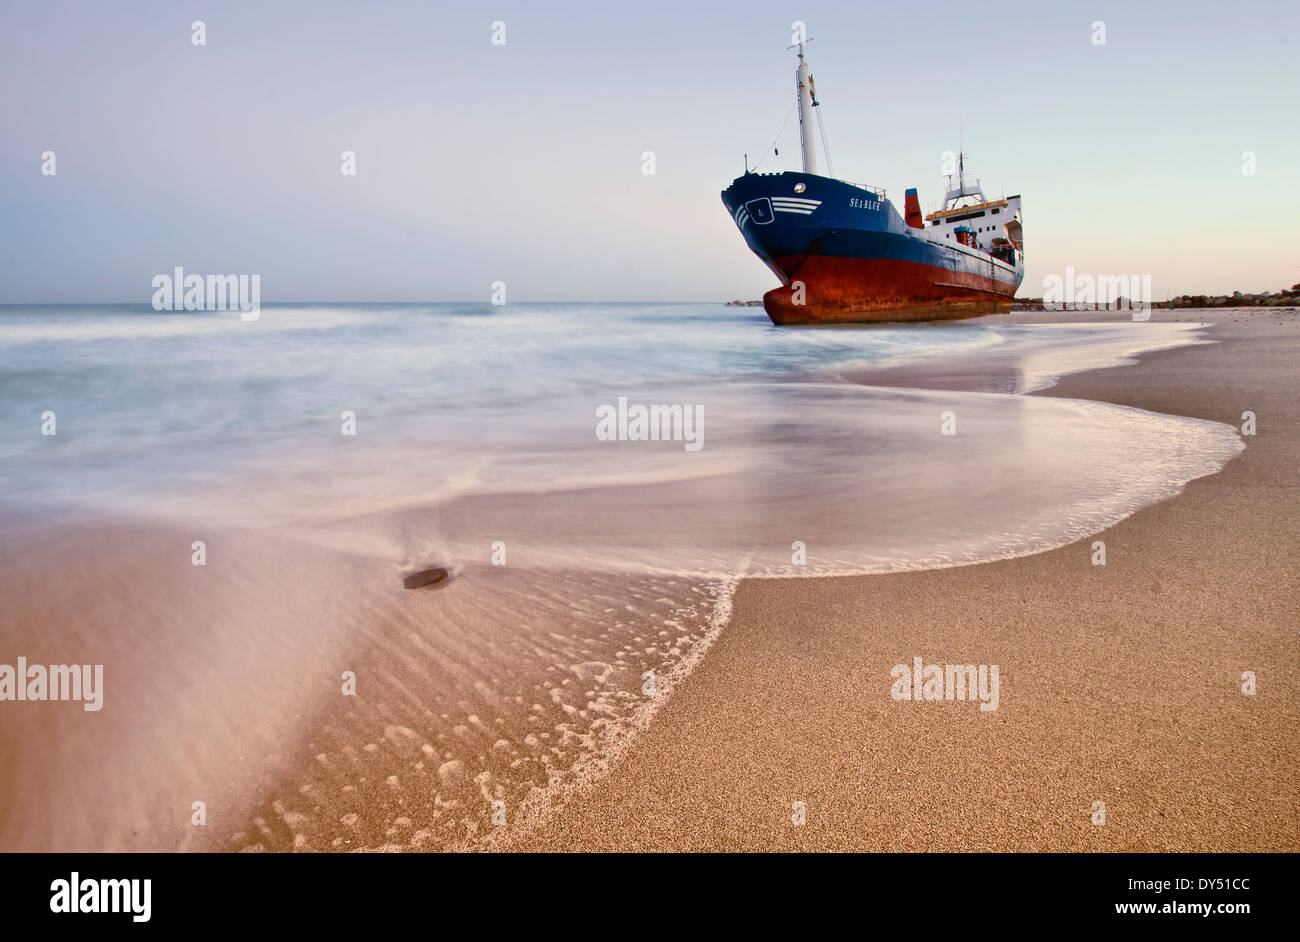 Grounded ship in Ajman, UAE Stock Photo